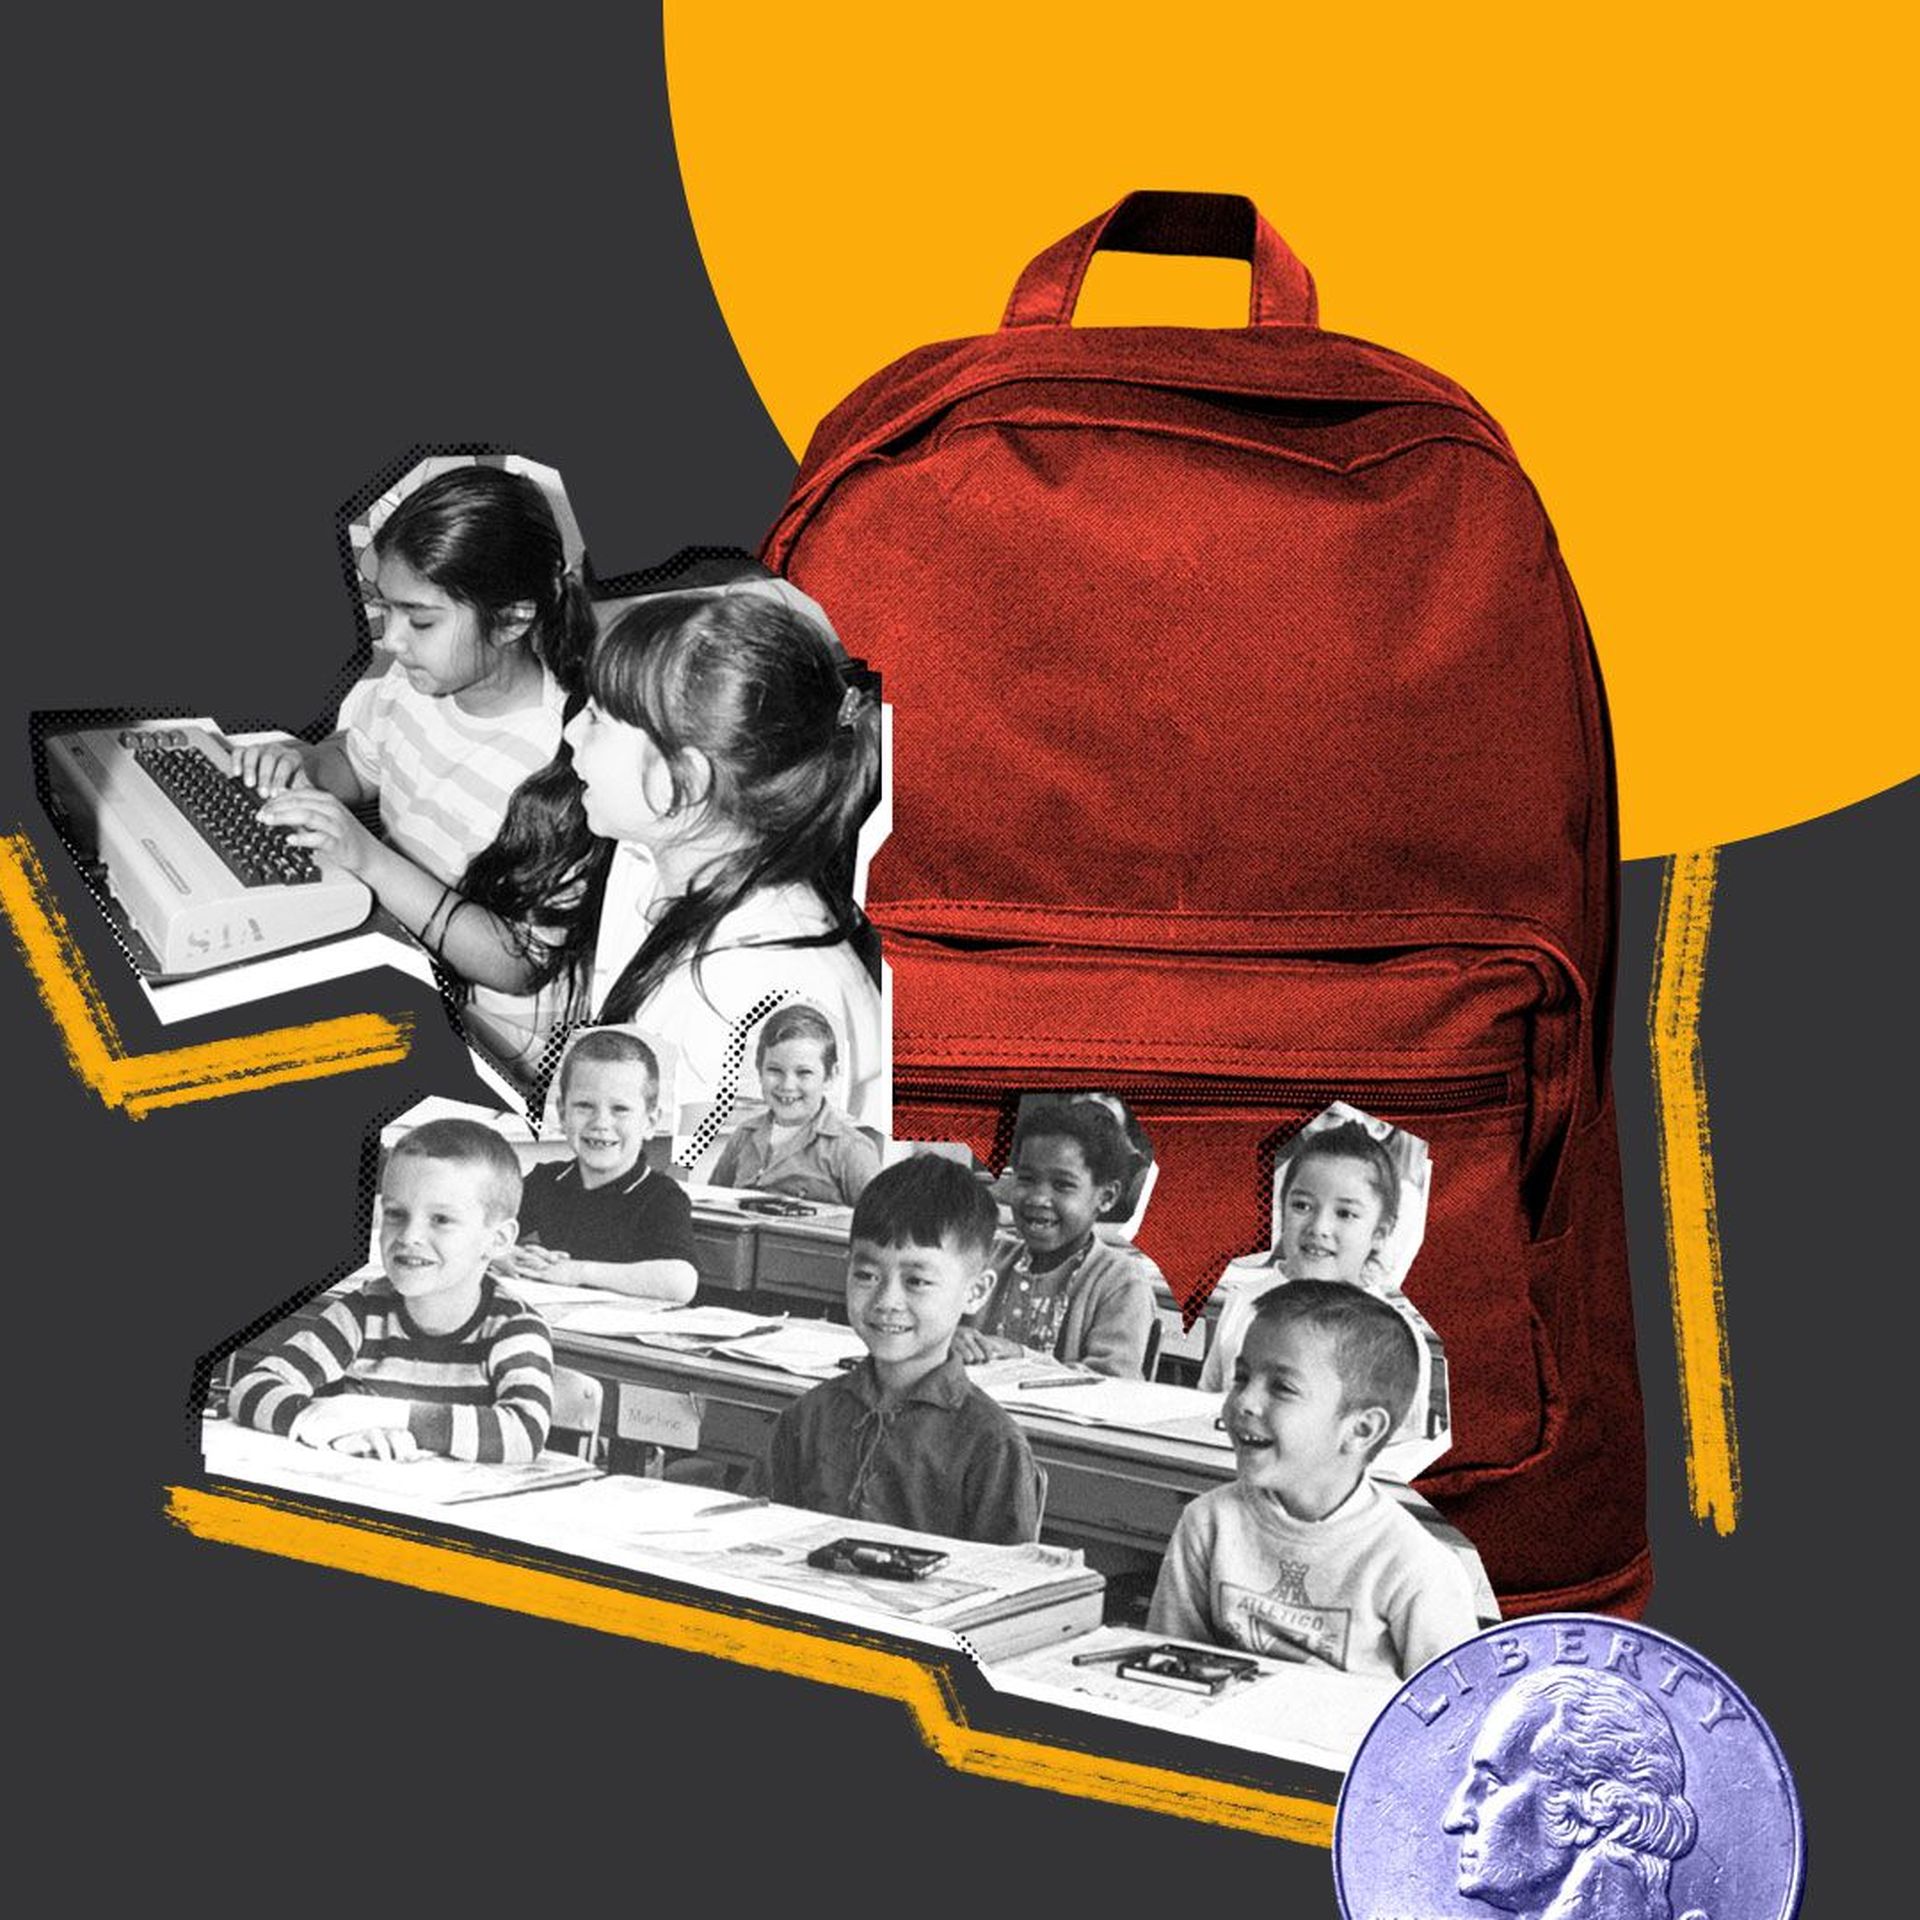 Photo illustration of children on a vintage computer keyboard, students smiling as their desks, and a quarter